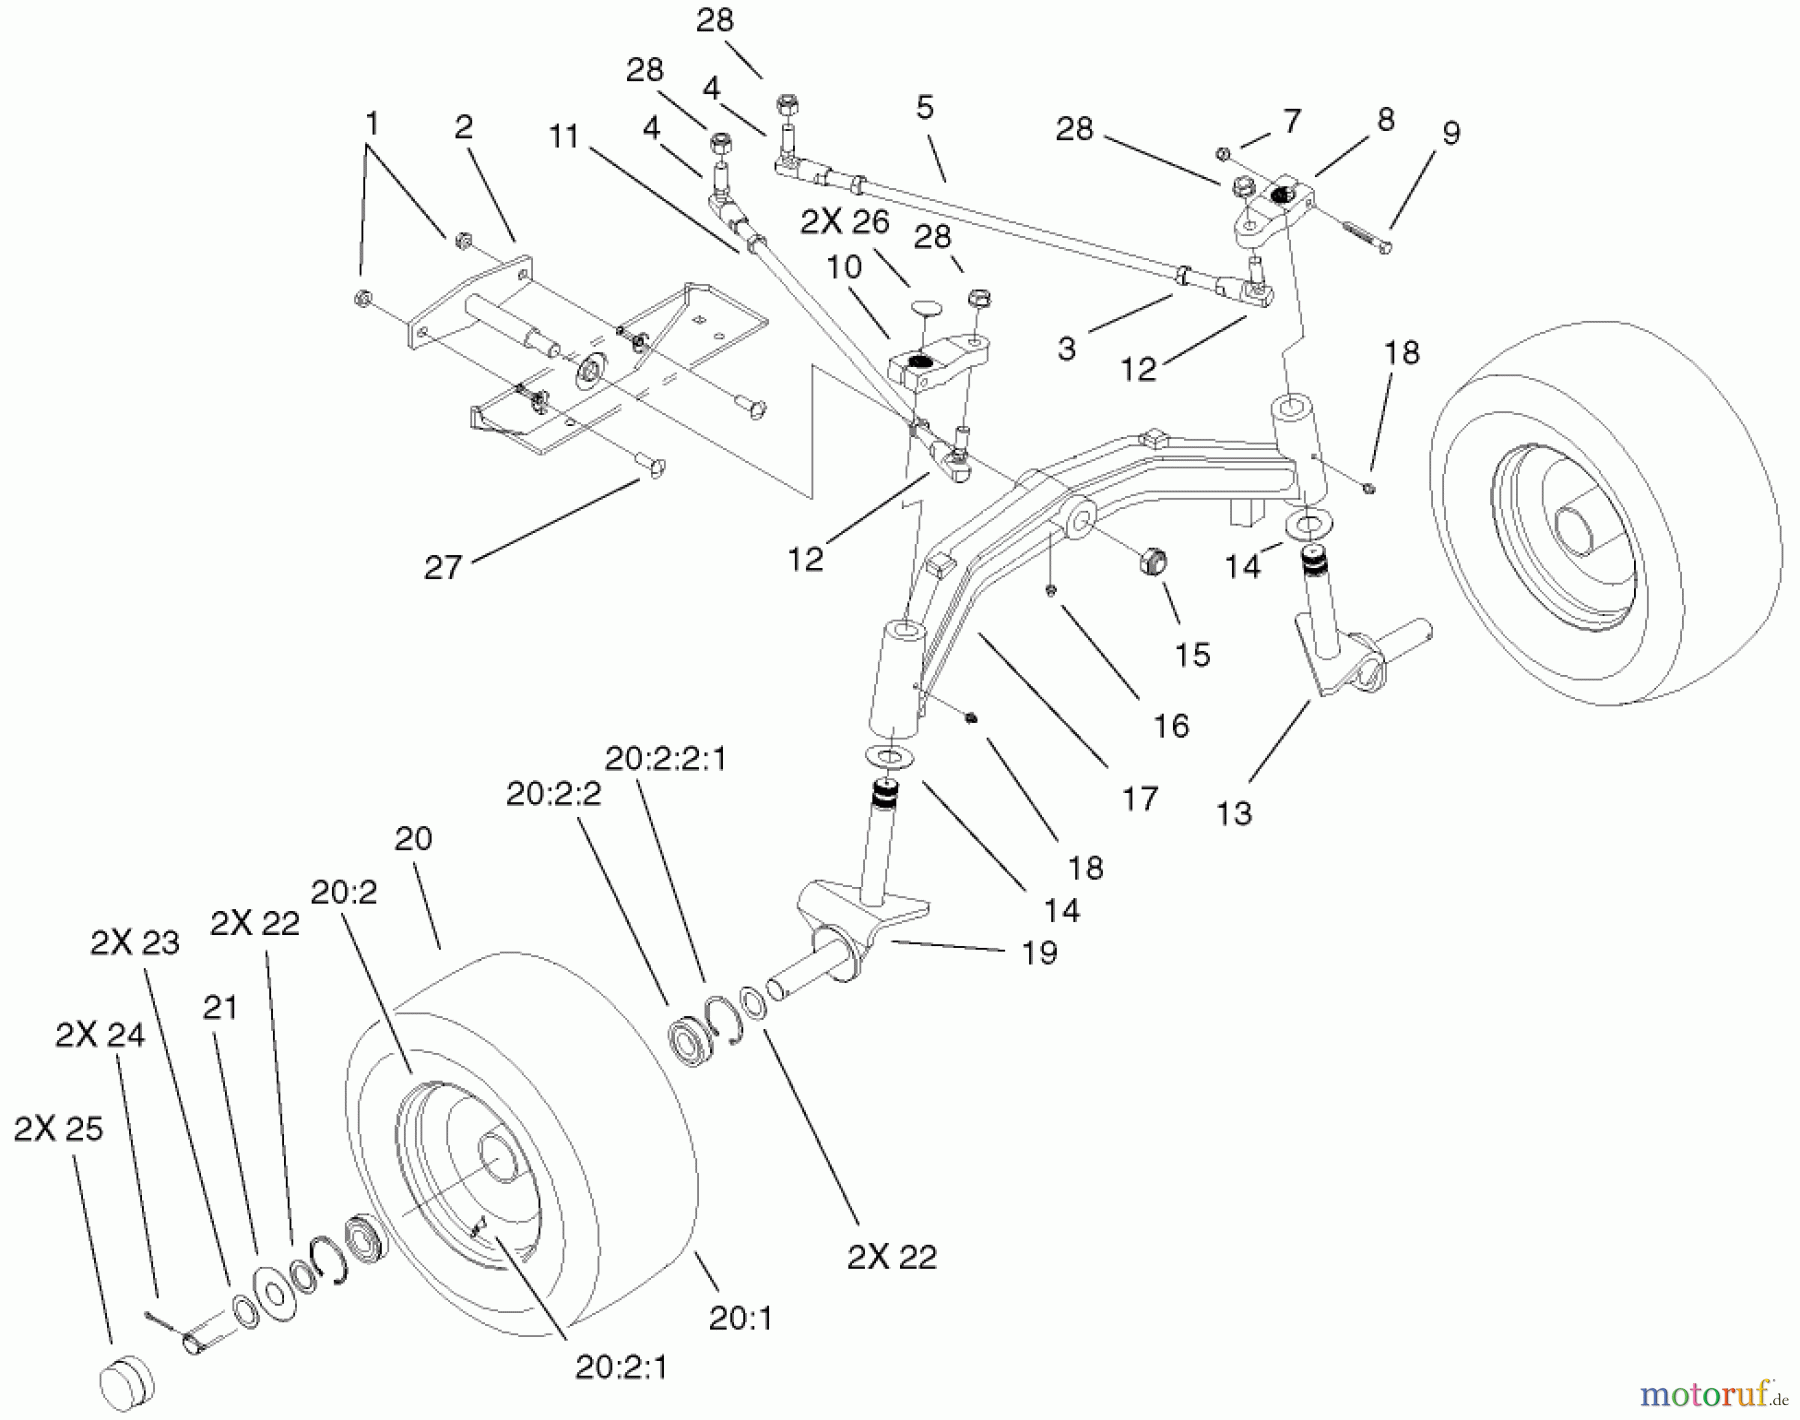  Toro Neu Mowers, Lawn & Garden Tractor Seite 1 73590 (523Dxi) - Toro 523Dxi Garden Tractor, 2002 (220000001-220999999) TIE RODS, SPINDLE & FRONT AXLE ASSEMBLY